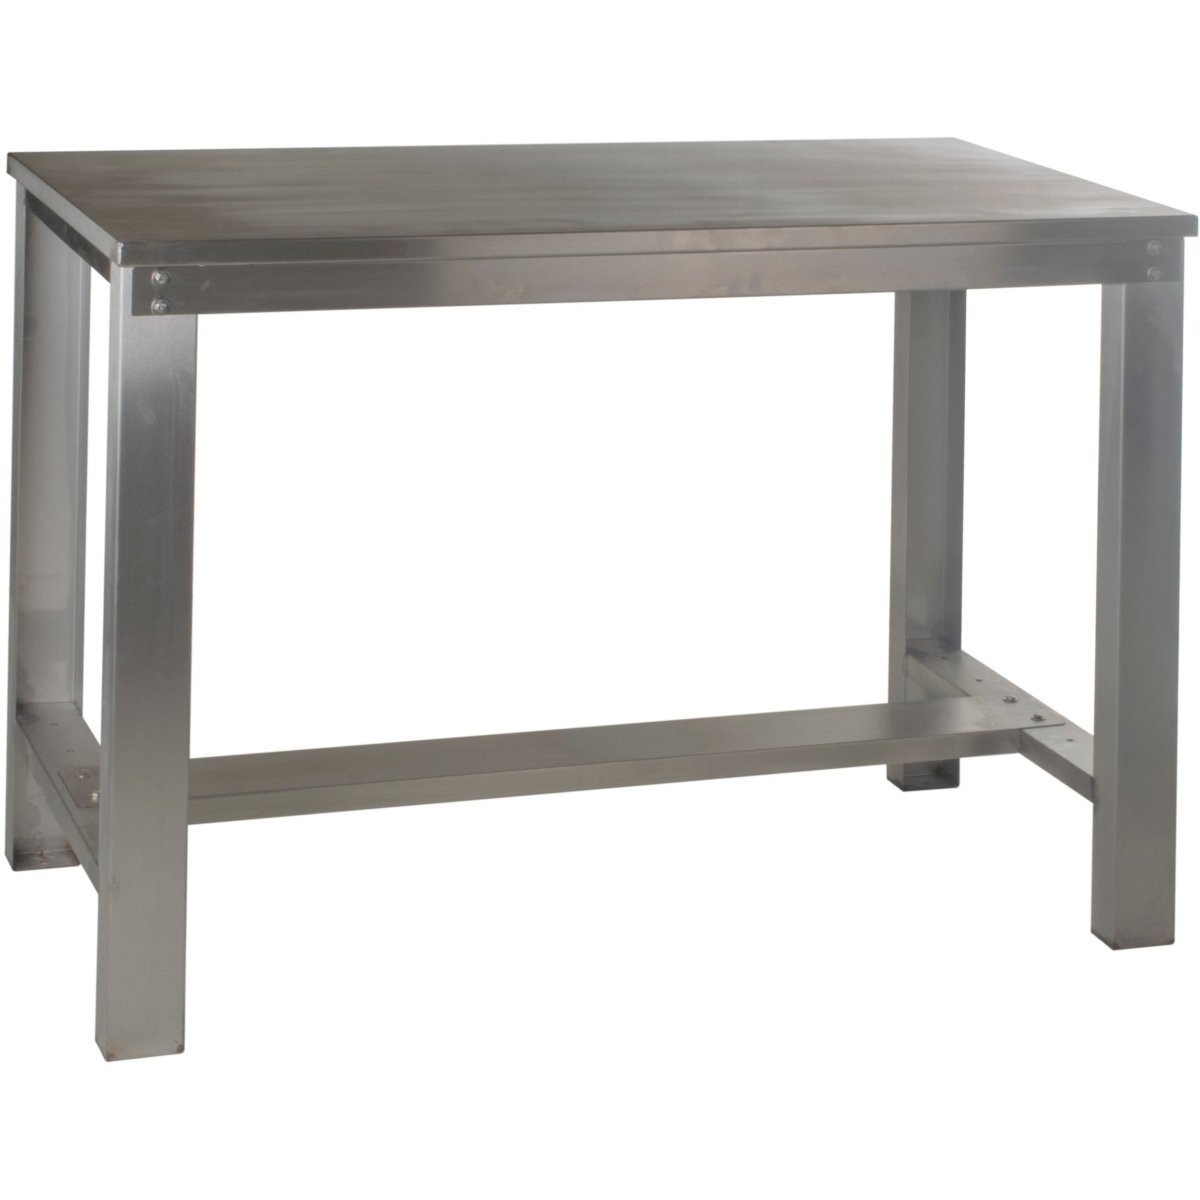 Stainless Steel Heavy Duty Workbench 450Kg Capacity - Warehouse Storage Products